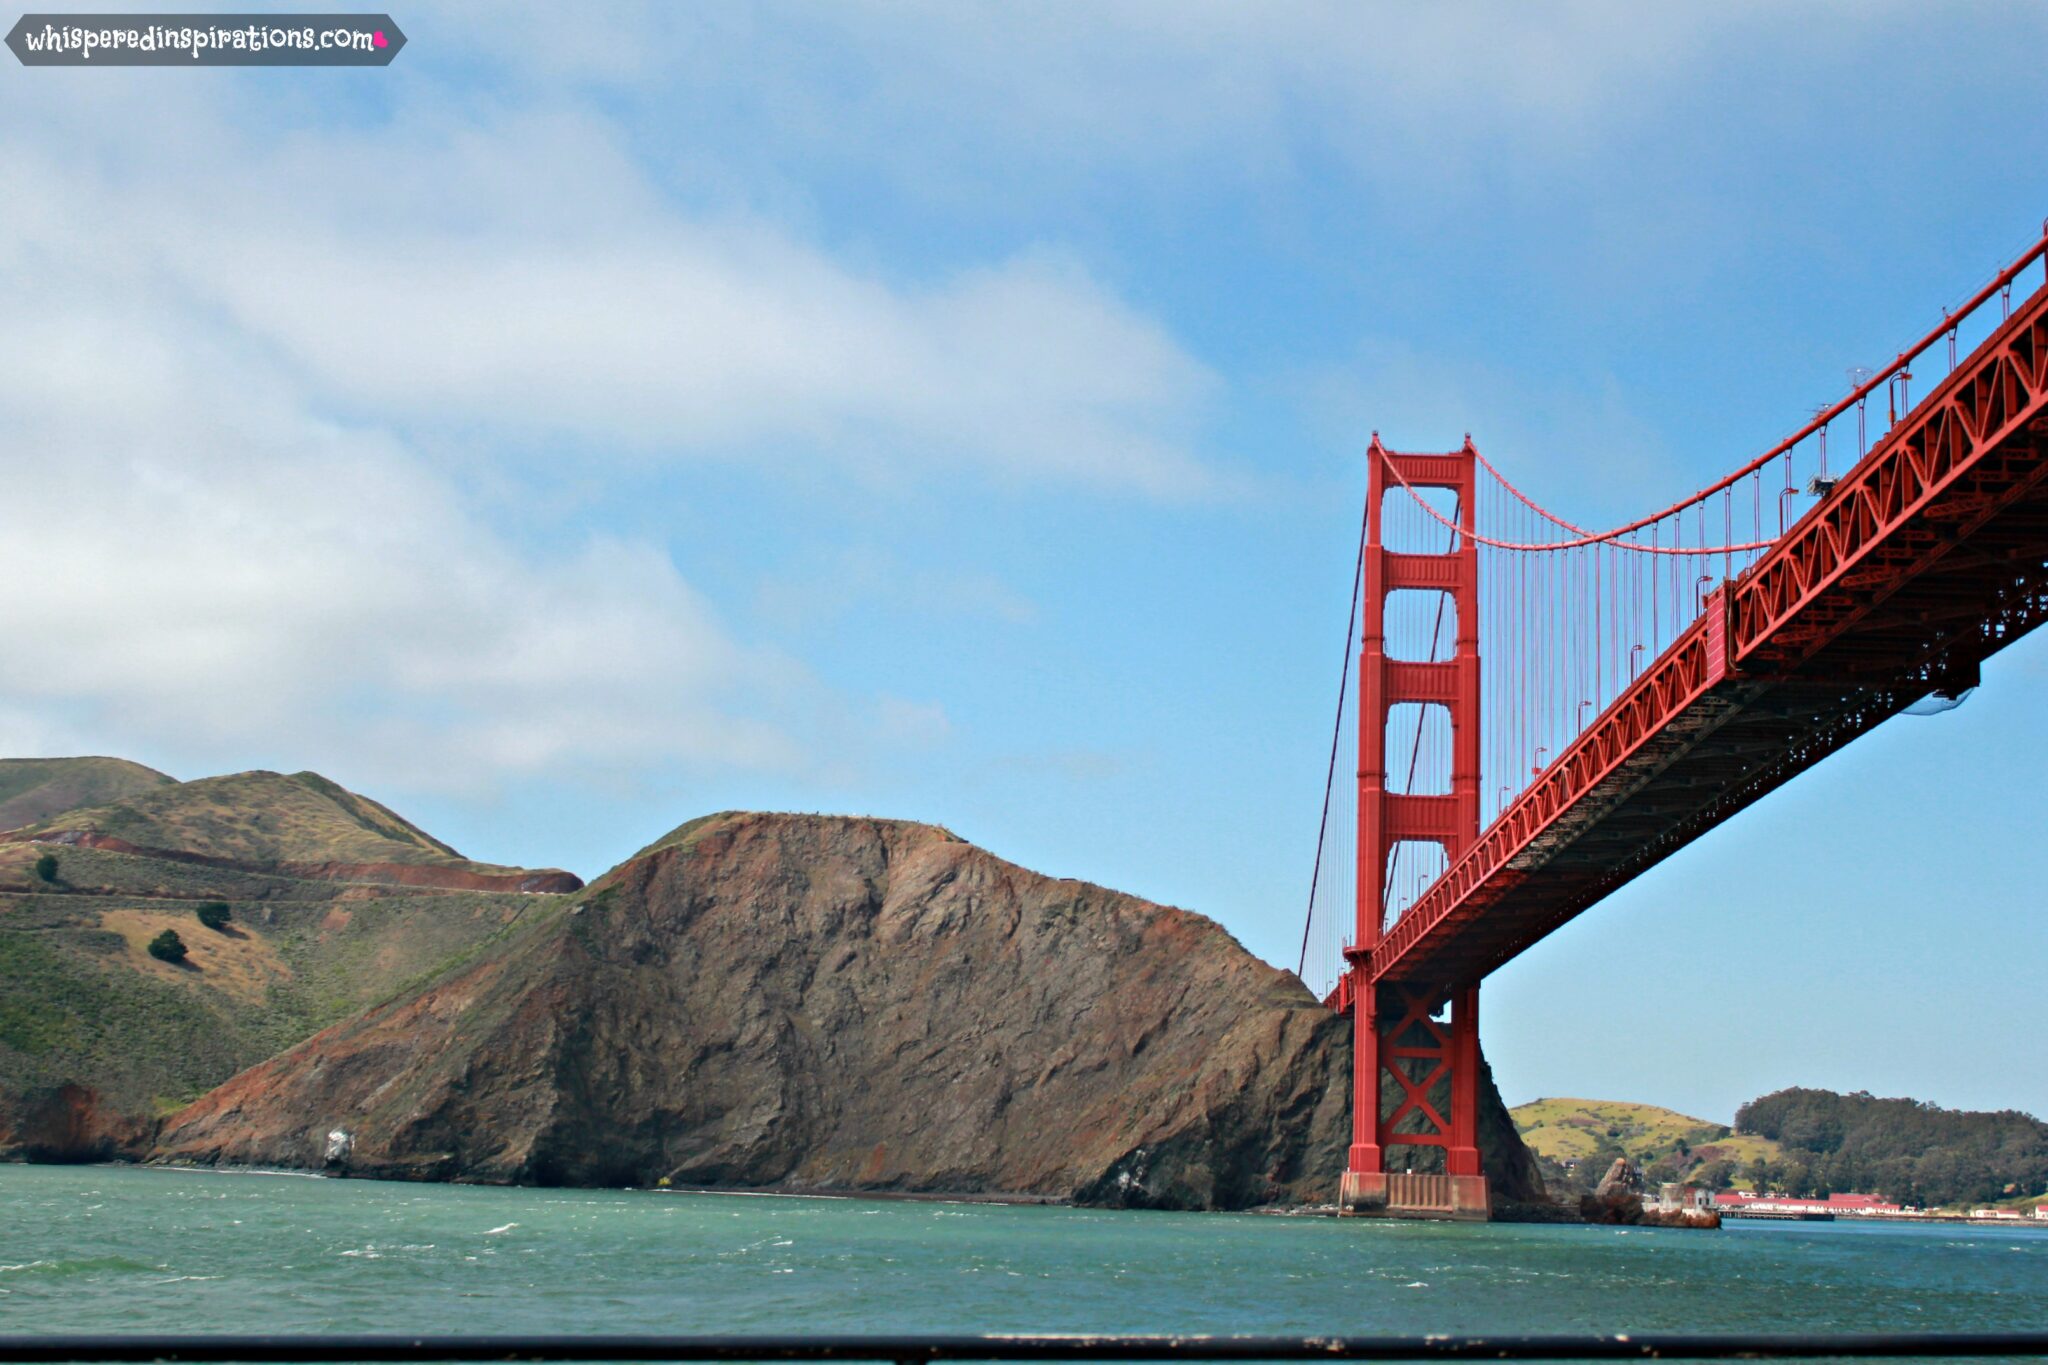 CityPASS San Francisco: Blue and Gold Fleet Bay Cruise is Exciting, Thrilling and Informative! #CityPASS #SanFrancisco